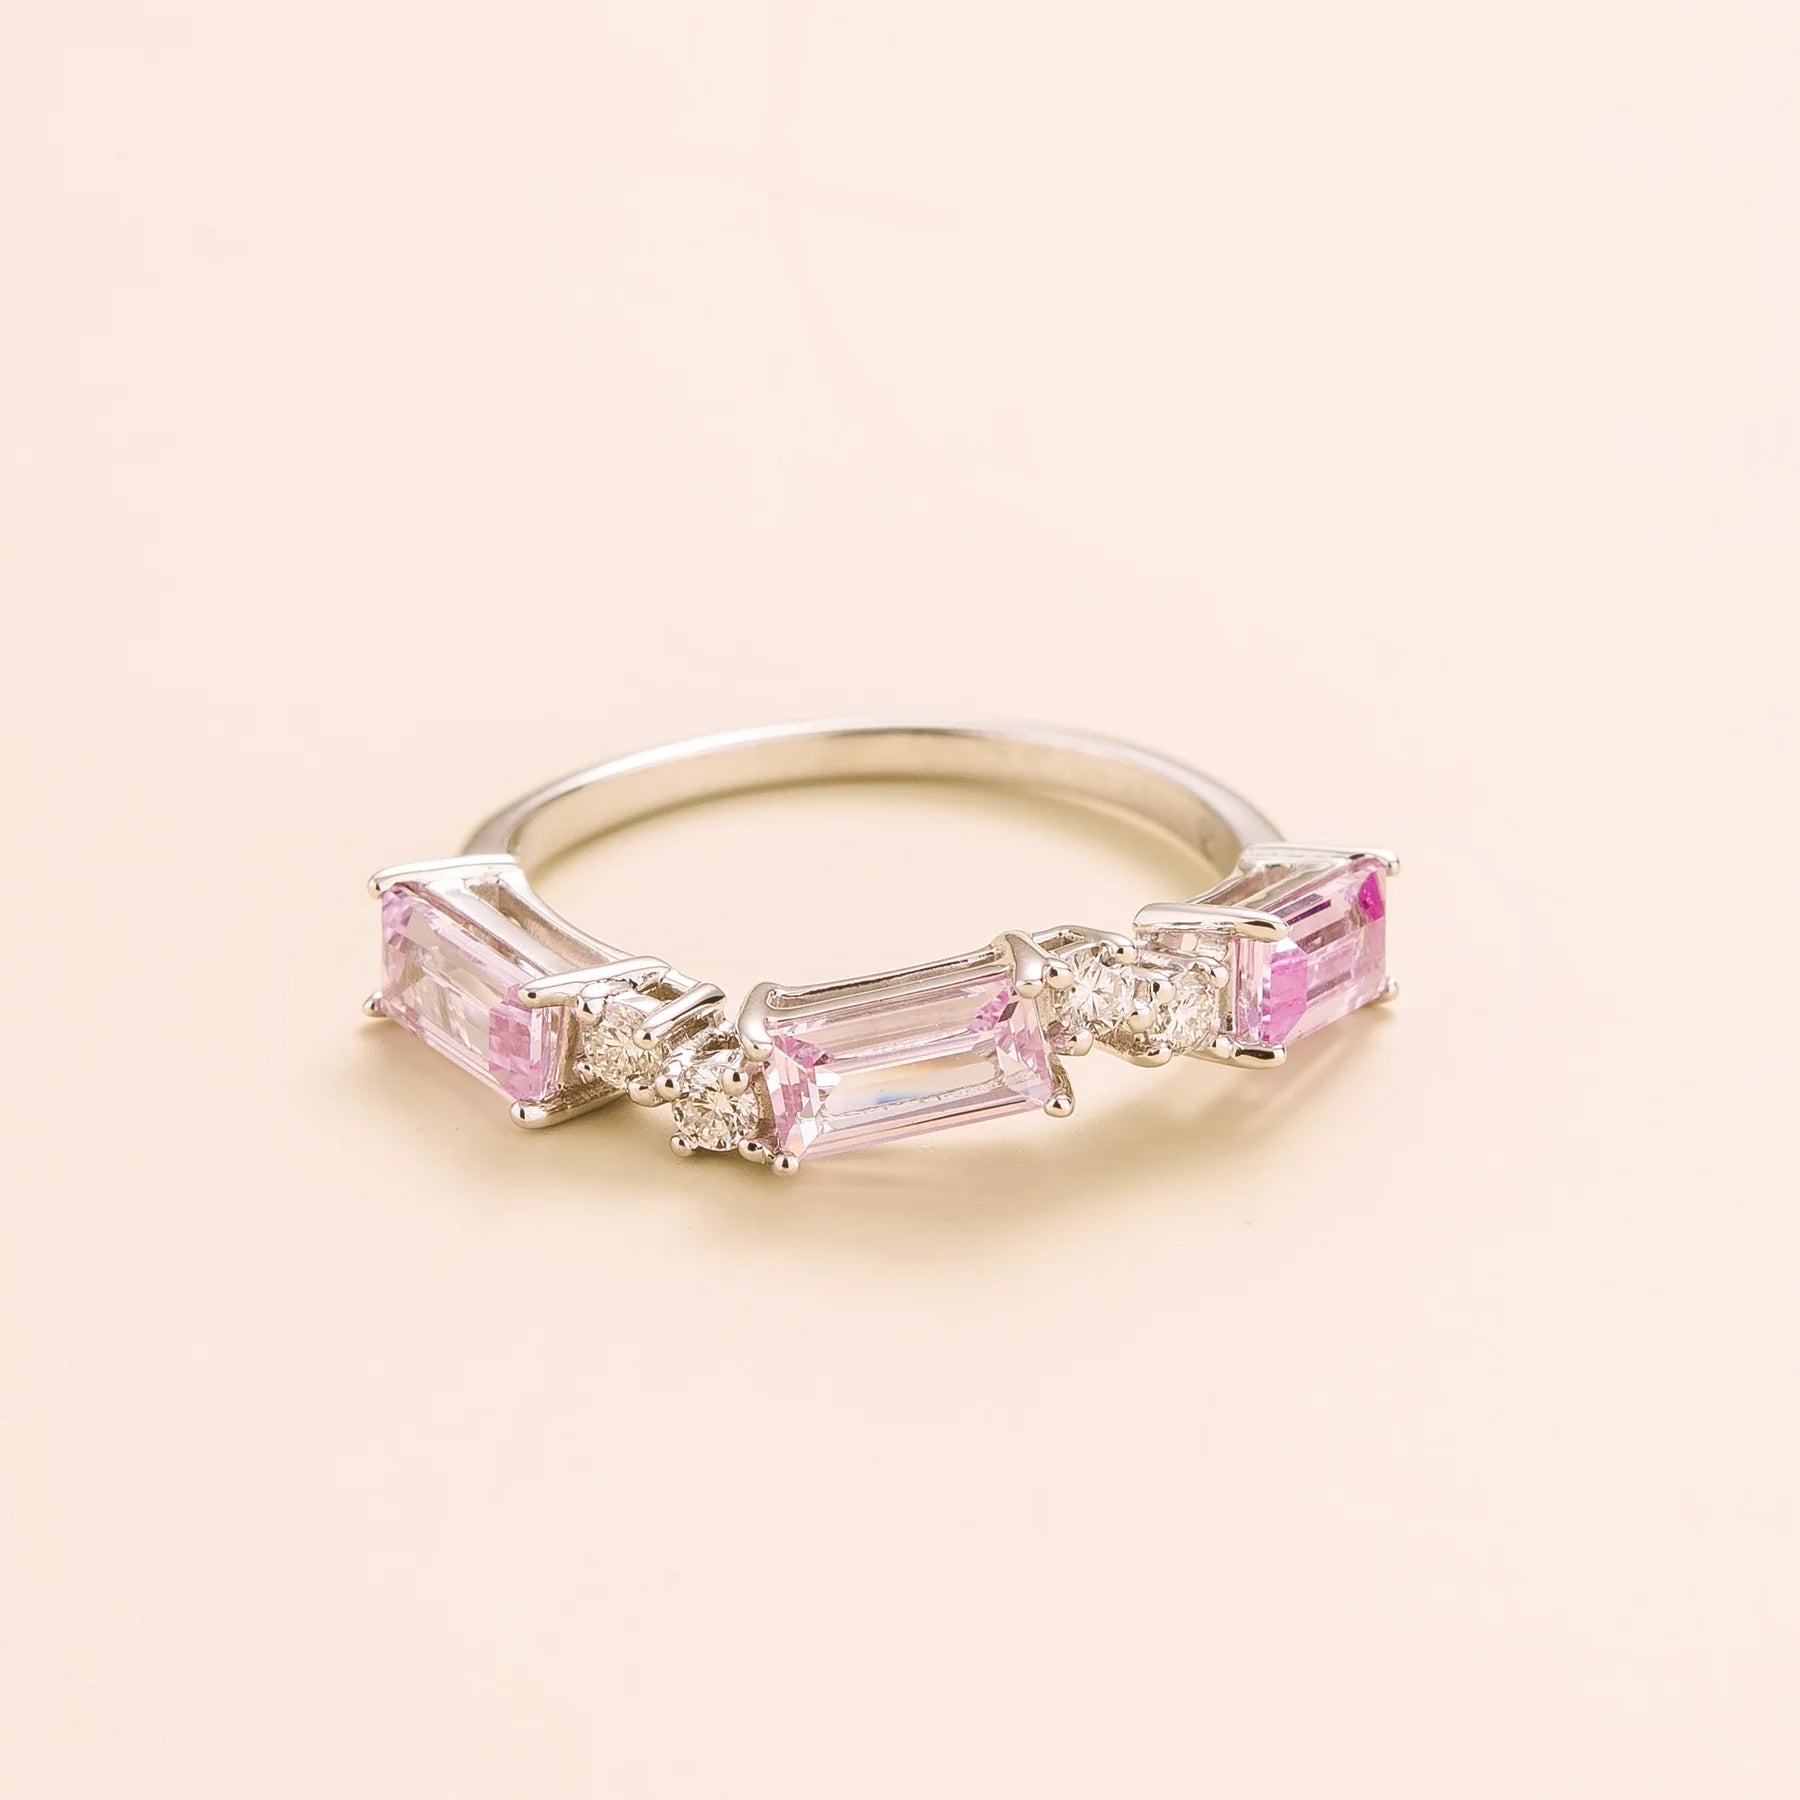 Forma White Gold Ring In Pink Sapphire and Diamond Bespoke Jewellery From London